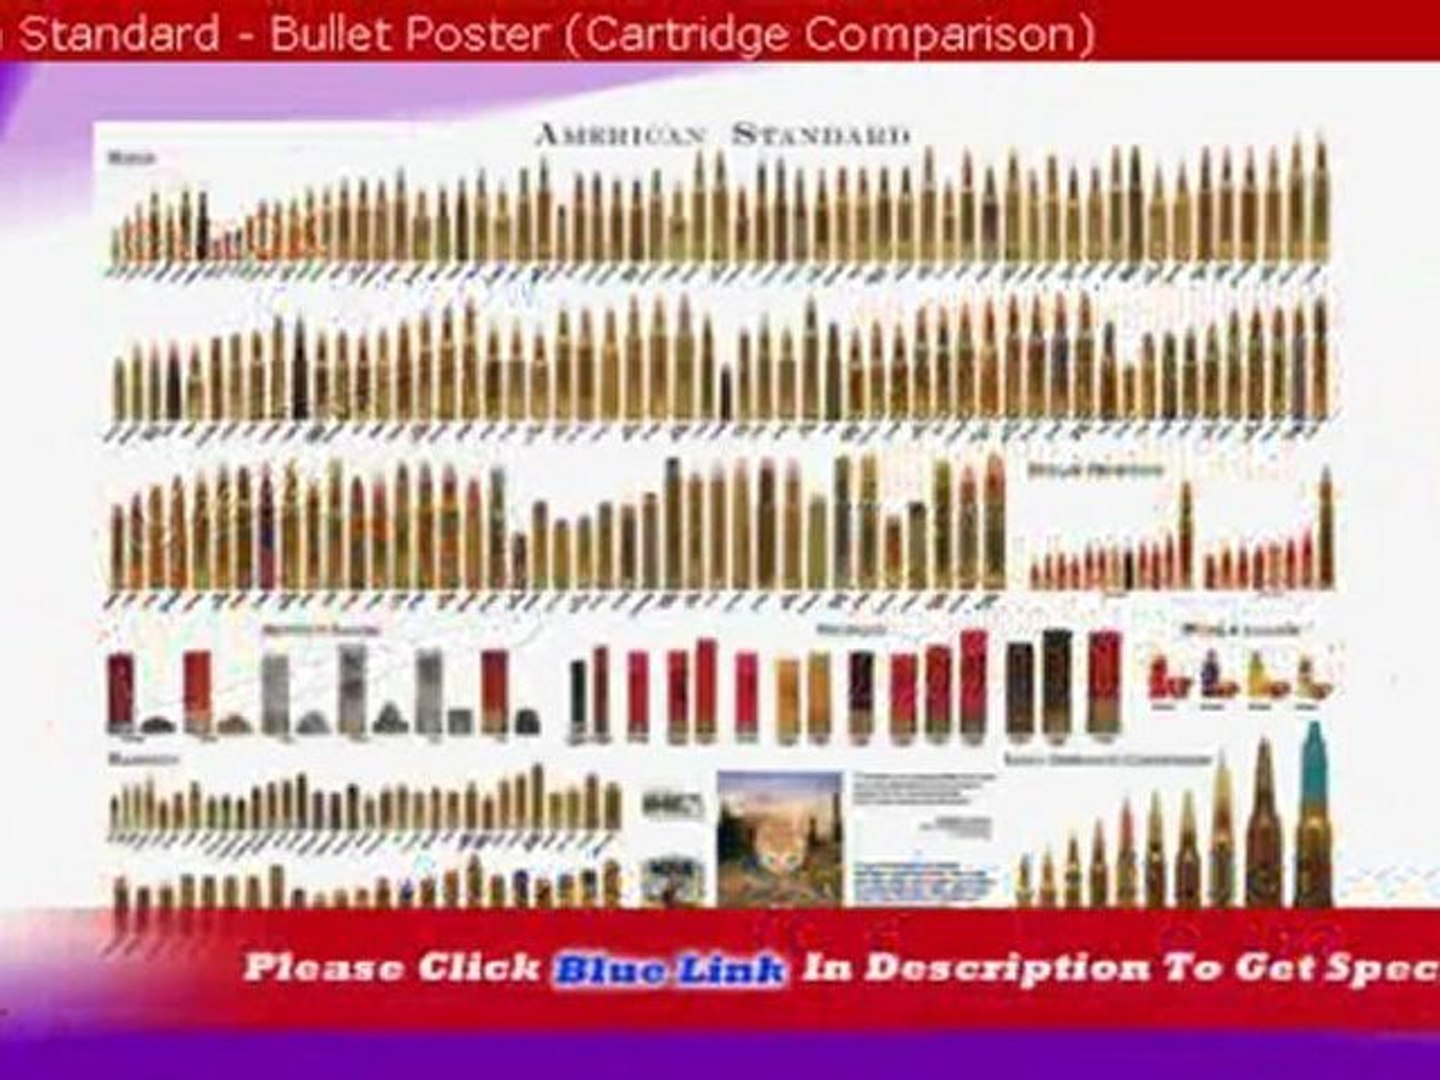 American Standard bullet list Military Collection Silk Poster 24x36"/60x90cm 